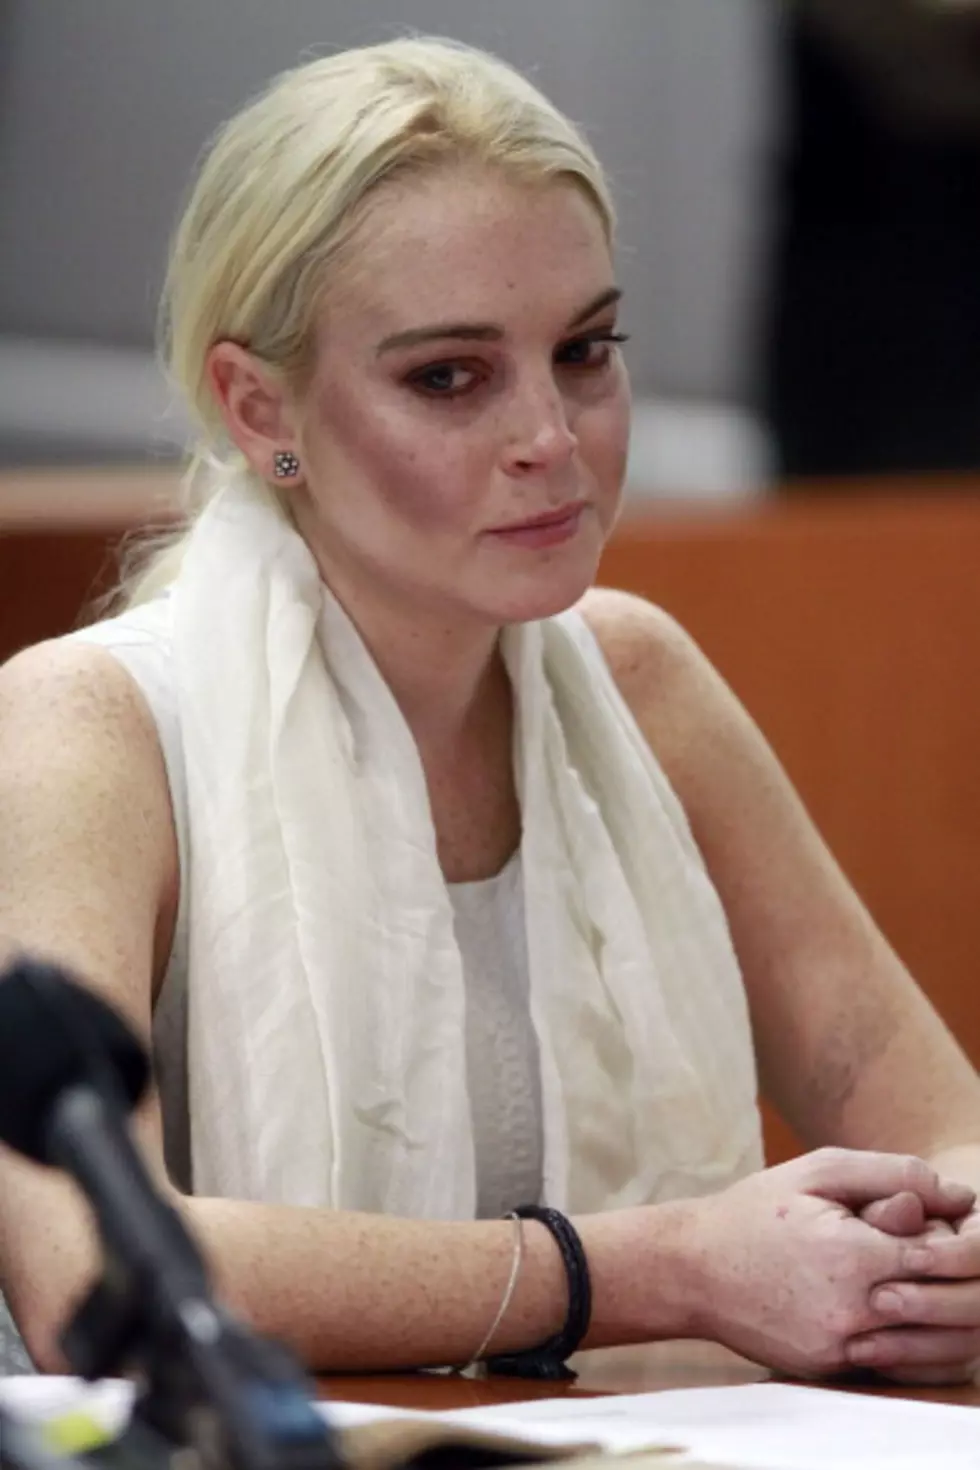 Lindsay Lohan Sentenced To 3 Months in Rehab